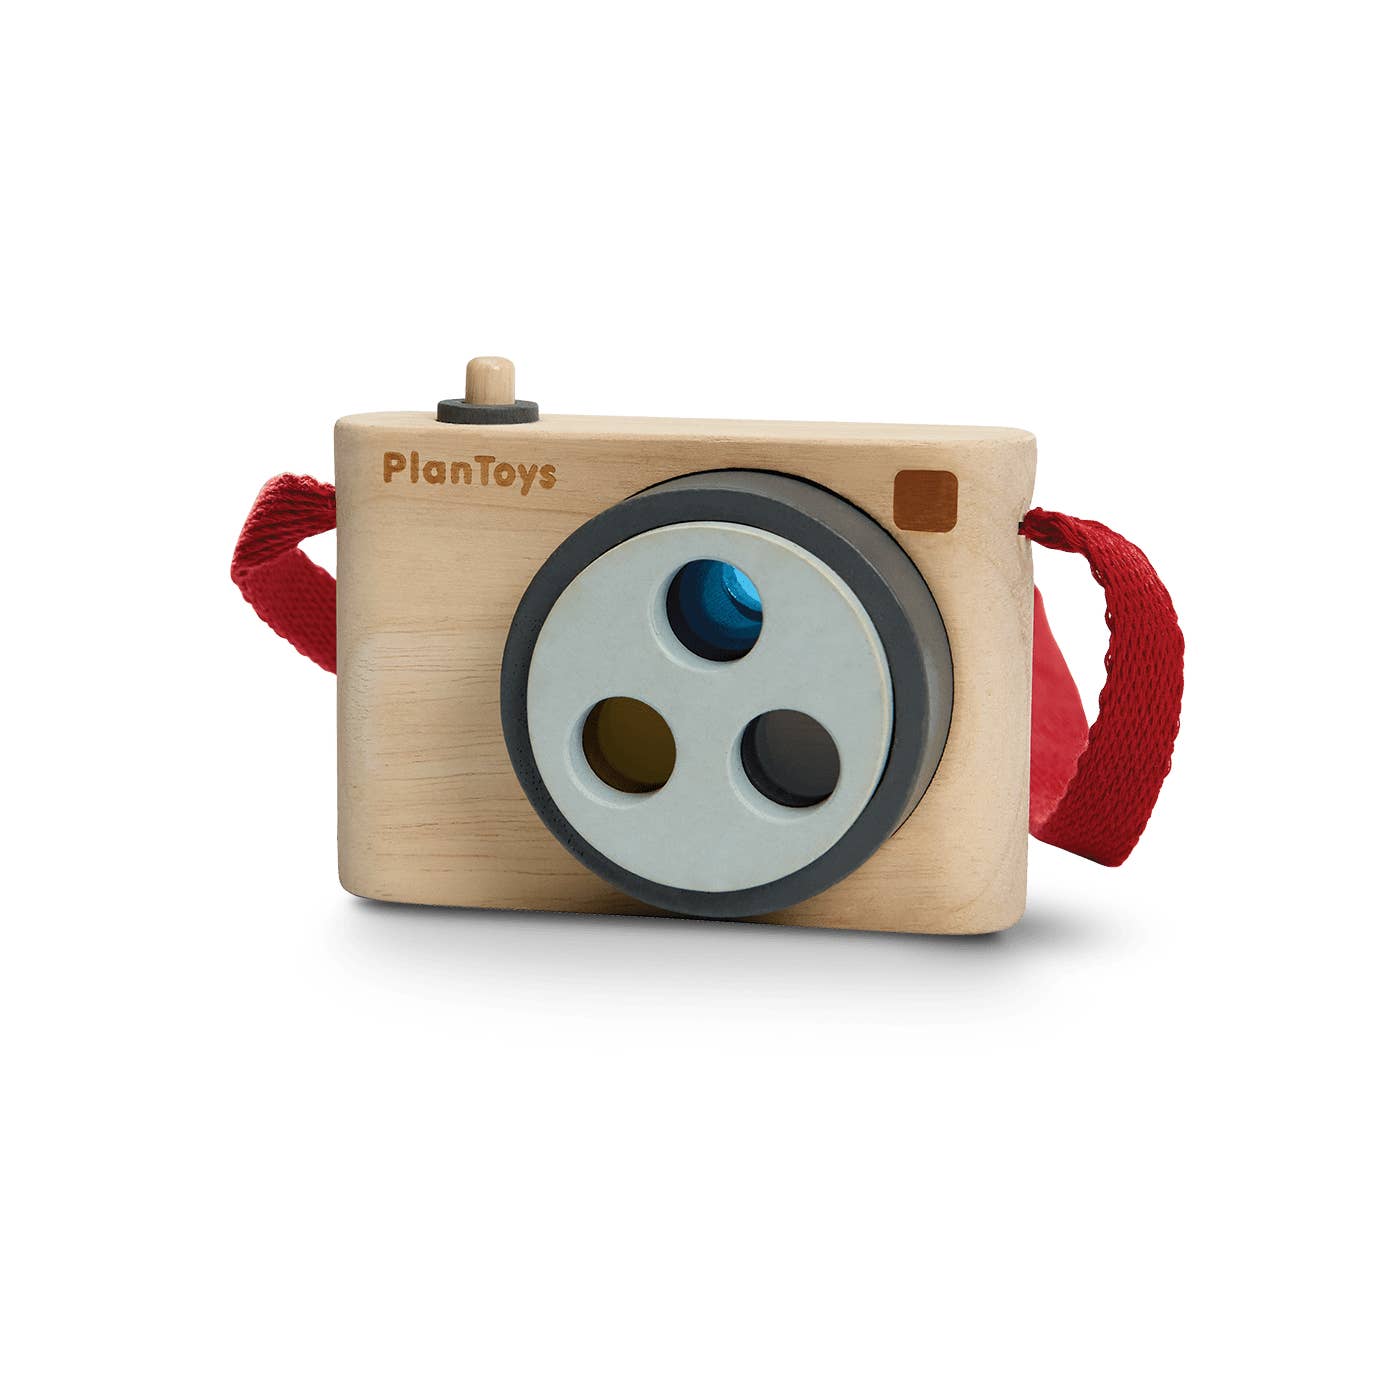 Plan Toys toy camera made sustainably with wood